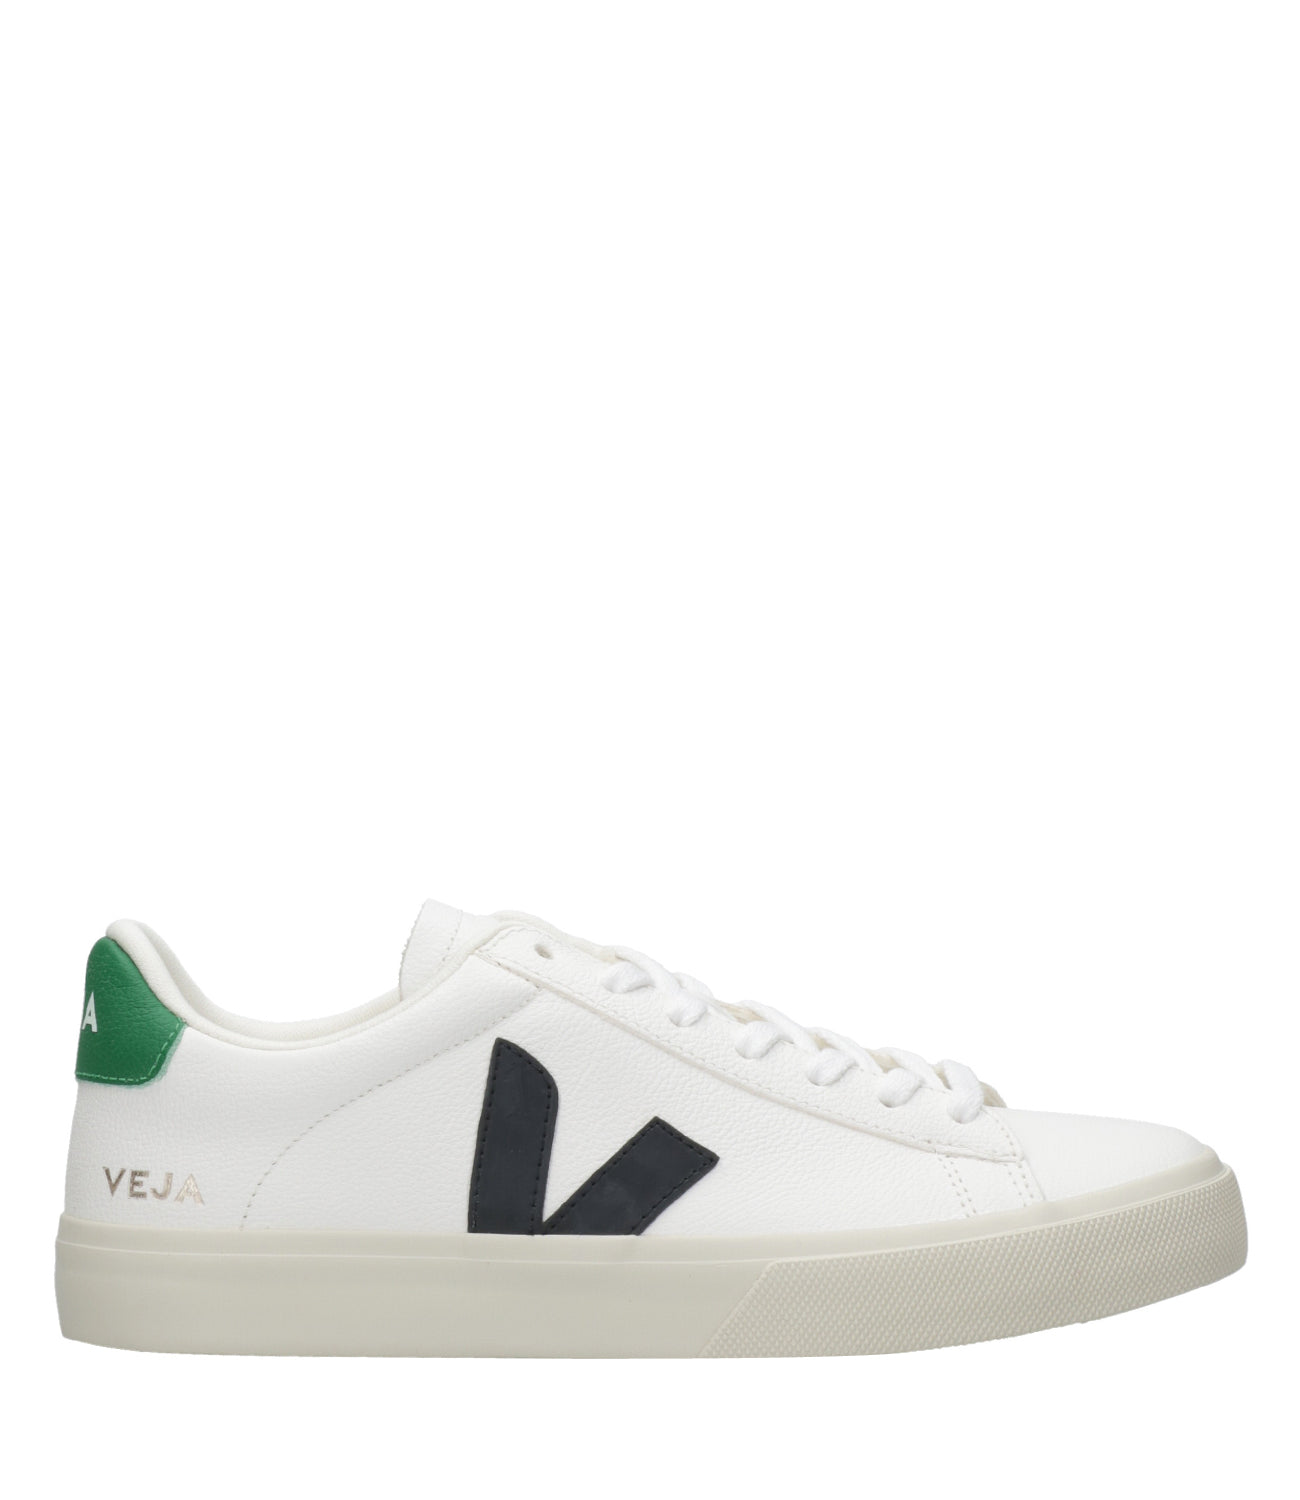 Veja | Field Sneakers White and Black